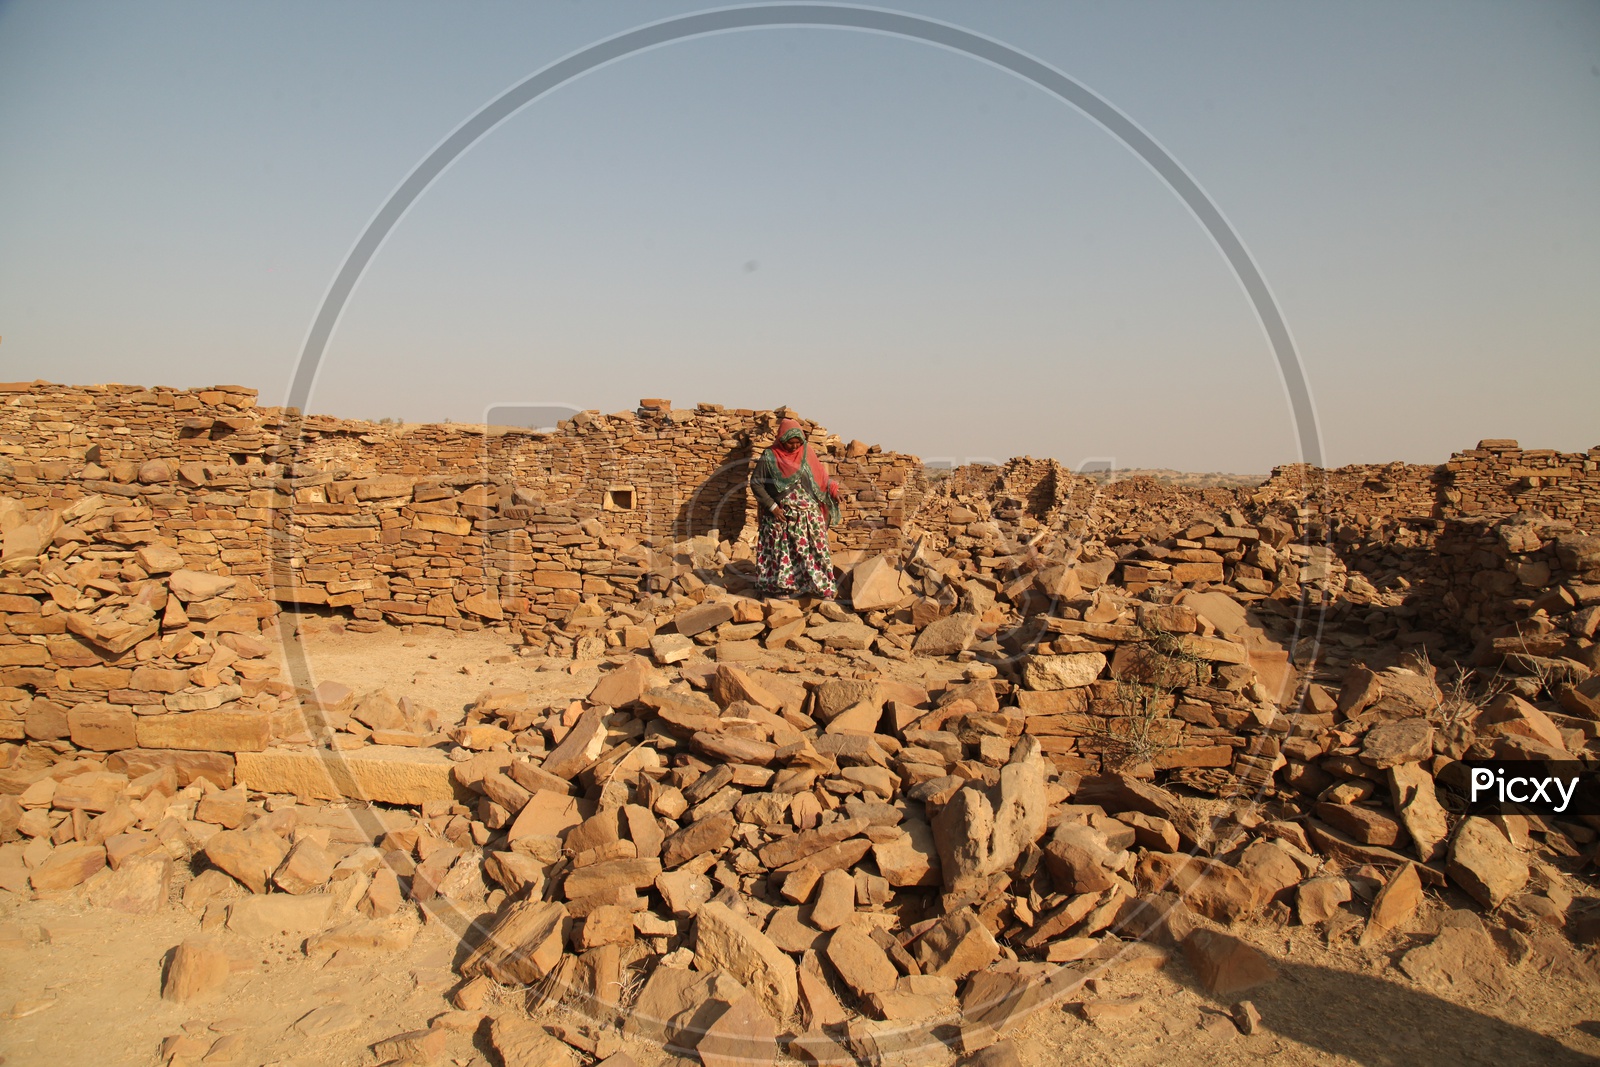 A women walking on the Ruins of the desert